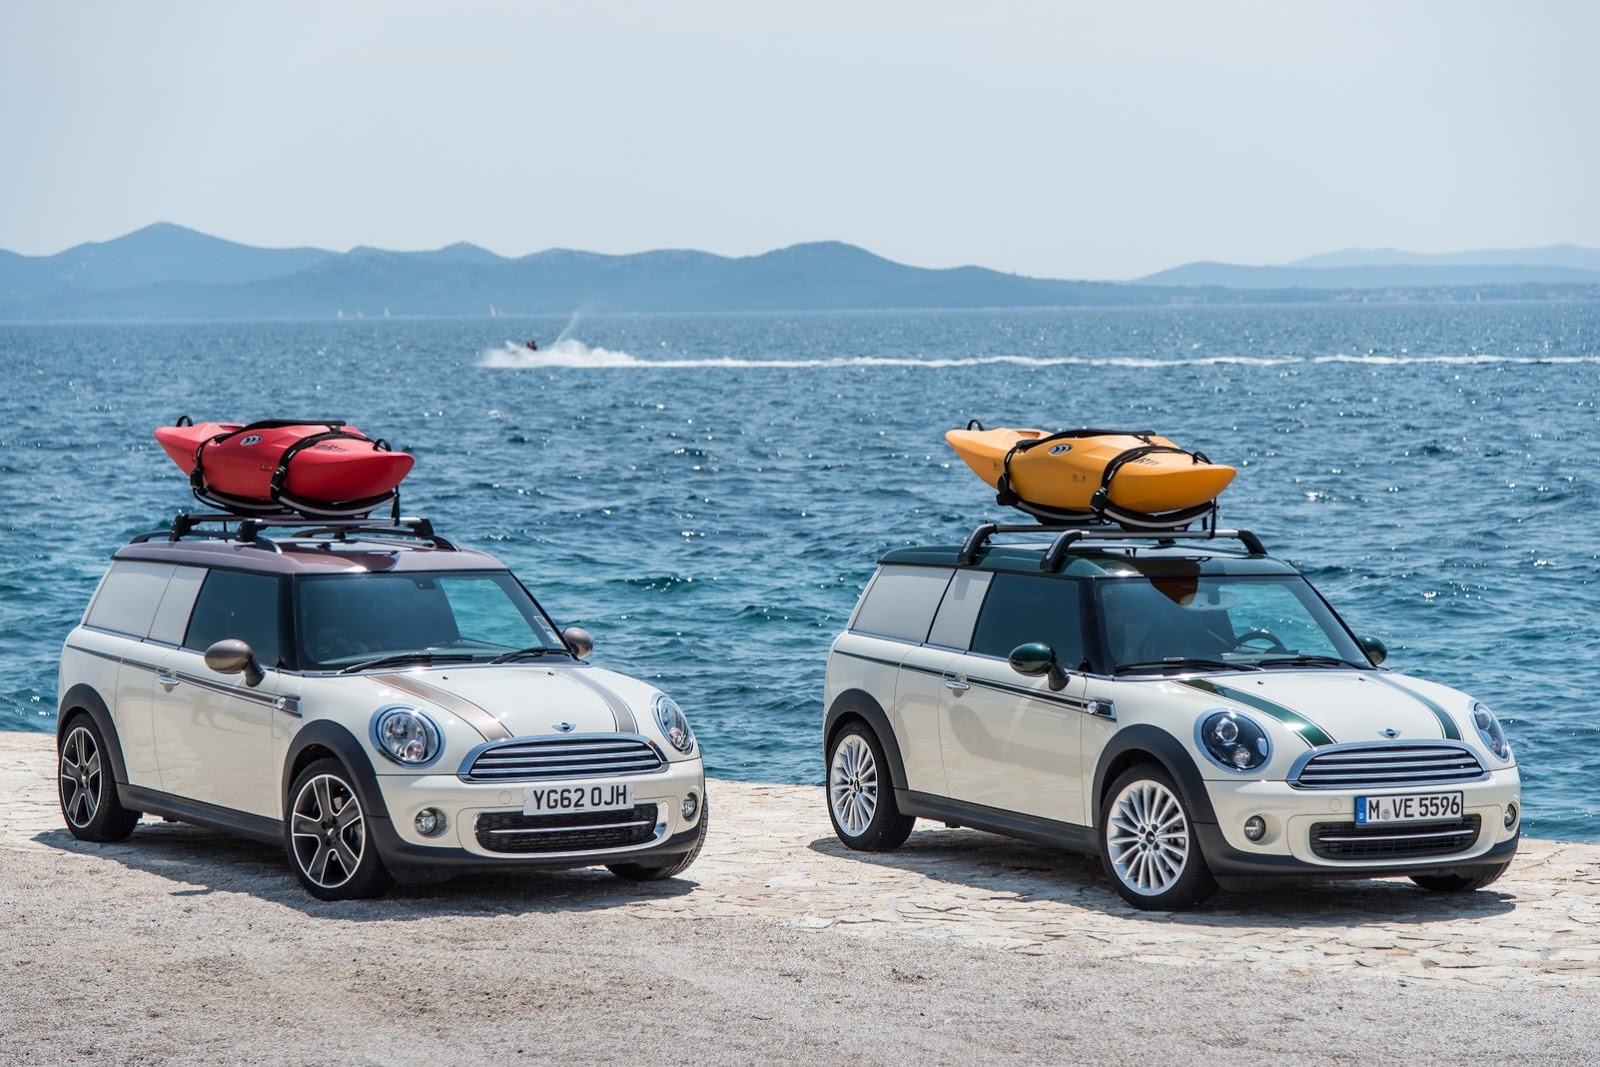 Three New Mini Concepts for Happy Campers